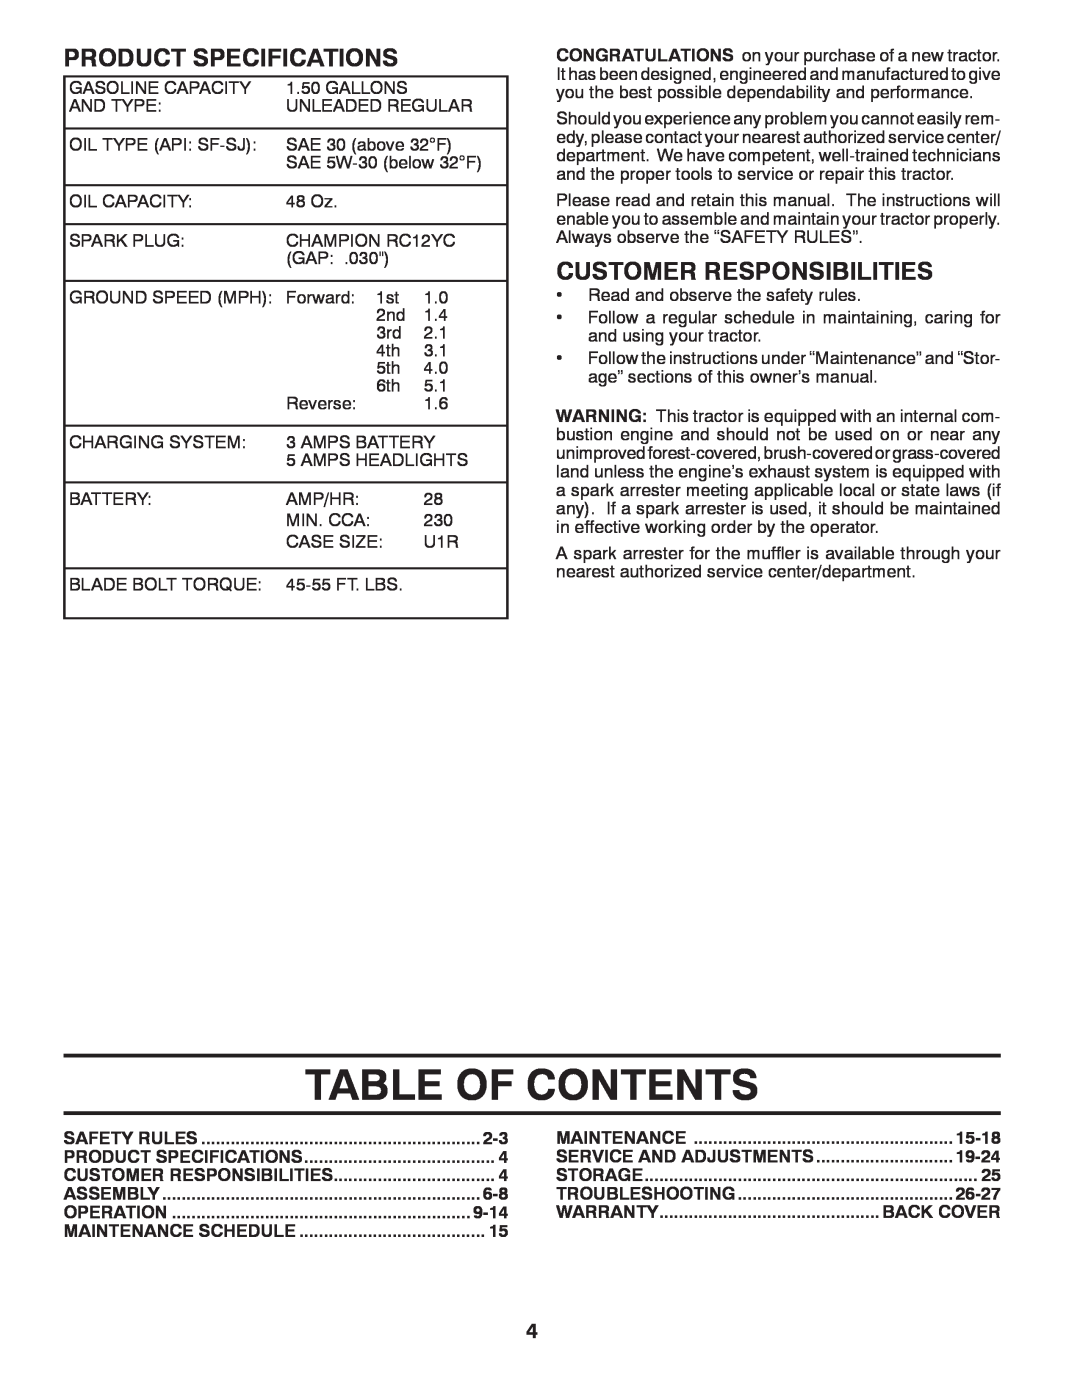 McCulloch 422800 manual Table Of Contents, Product Specifications, Customer Responsibilities 